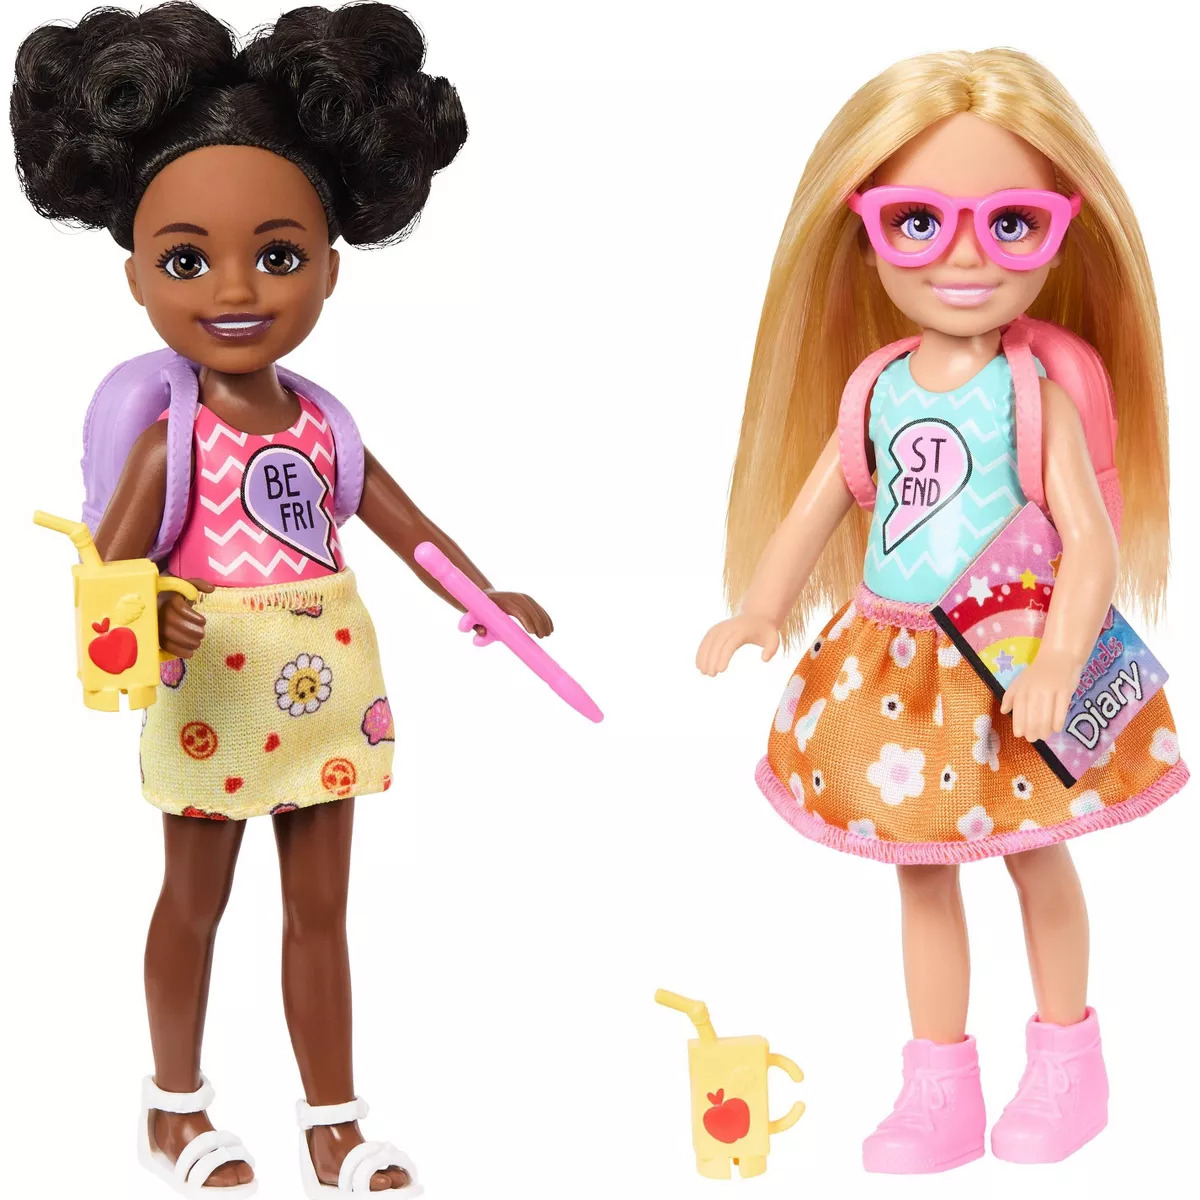 Barbie Chelsea Play Together Doll Pack, Set of 2 Small Dolls & 7 Accessories The